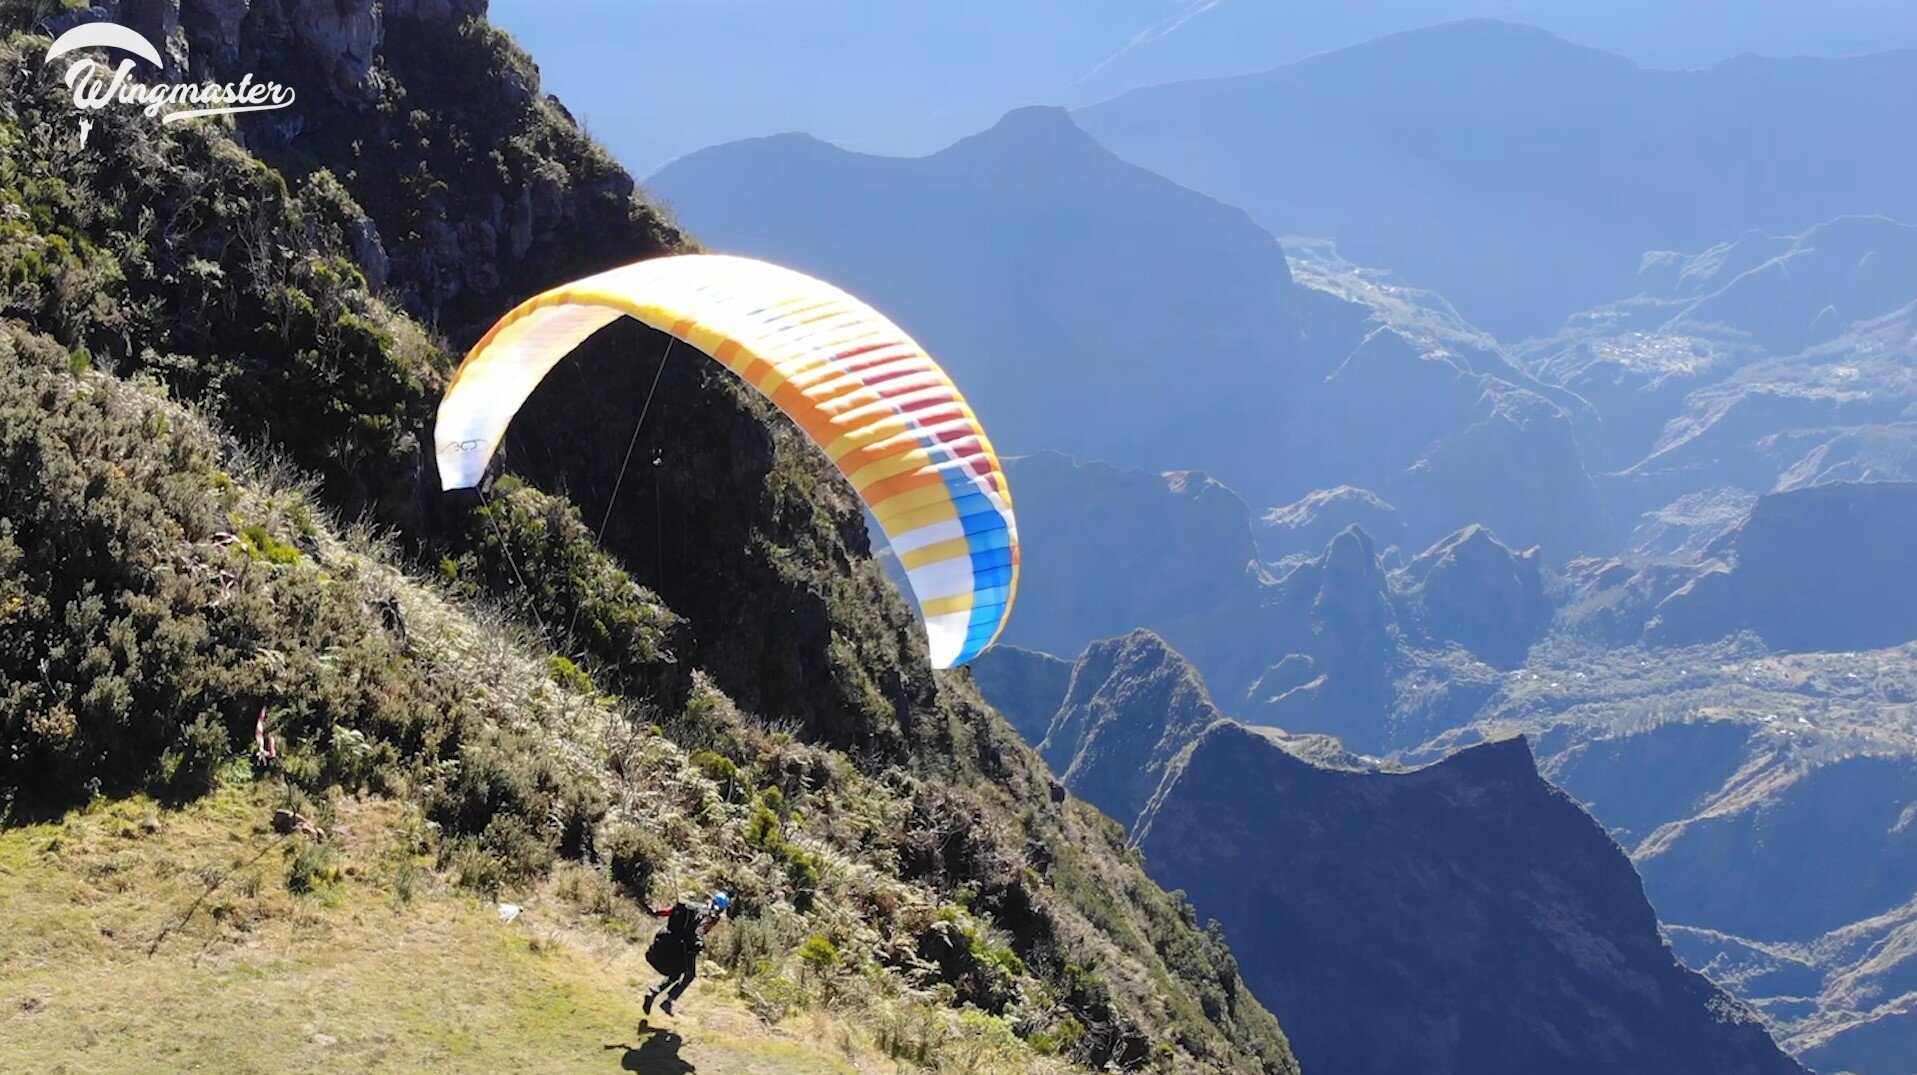  Wingmaster, paragliding masterclass video, paragliding training, learn paragliding, 21 episodes, 11 hours, paragliding techniques from a pro, complement to the paragliding training. For all levels. 